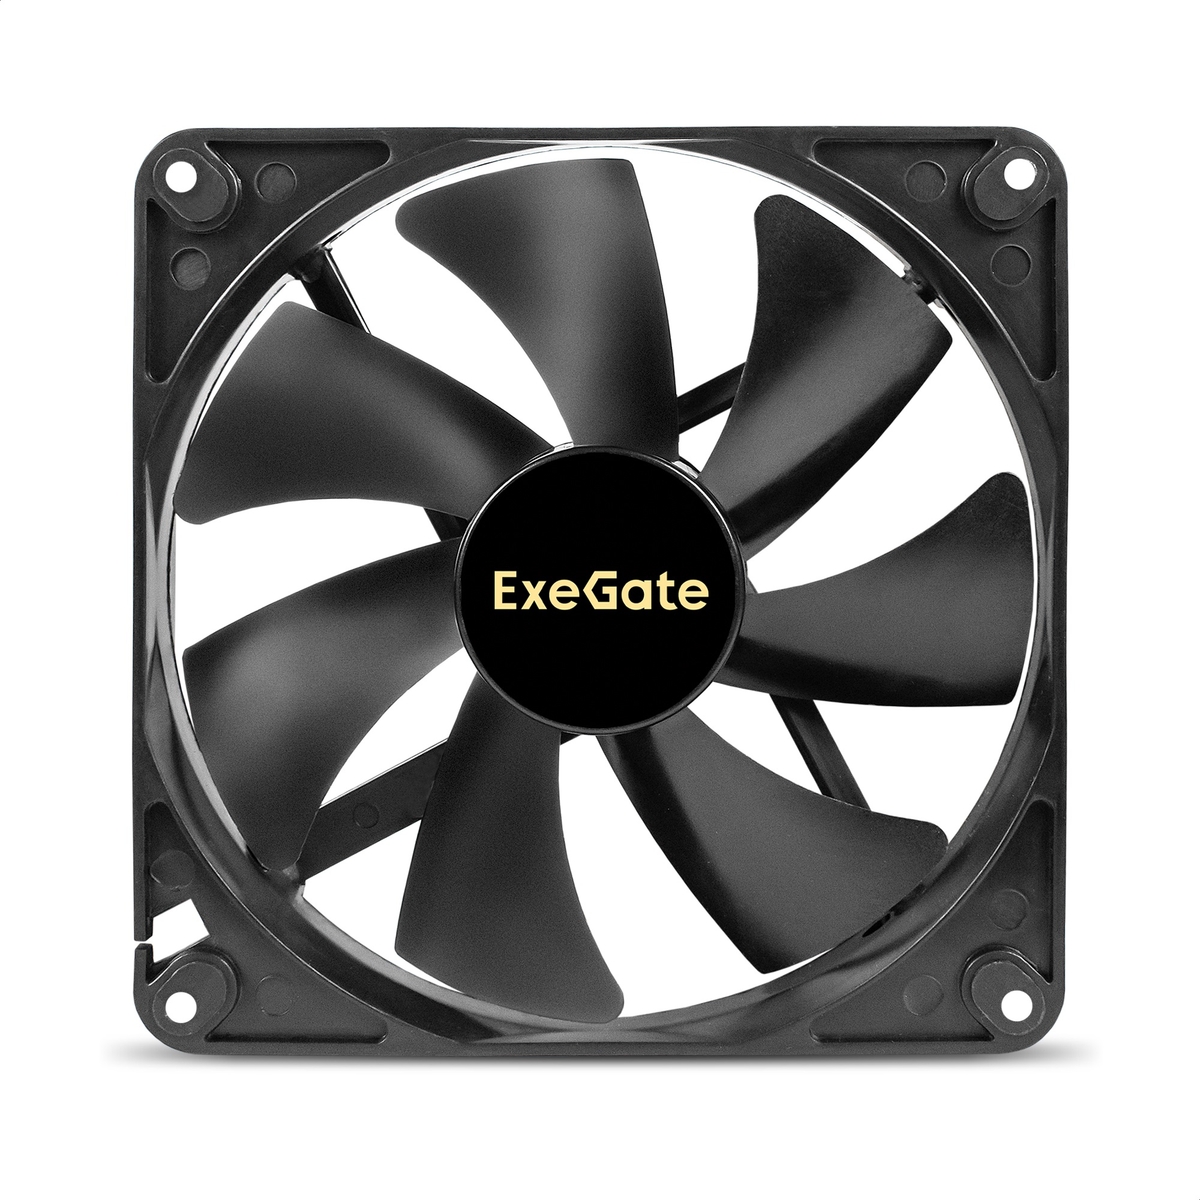 Fan ExeGate ExtraPower EP14025S2P